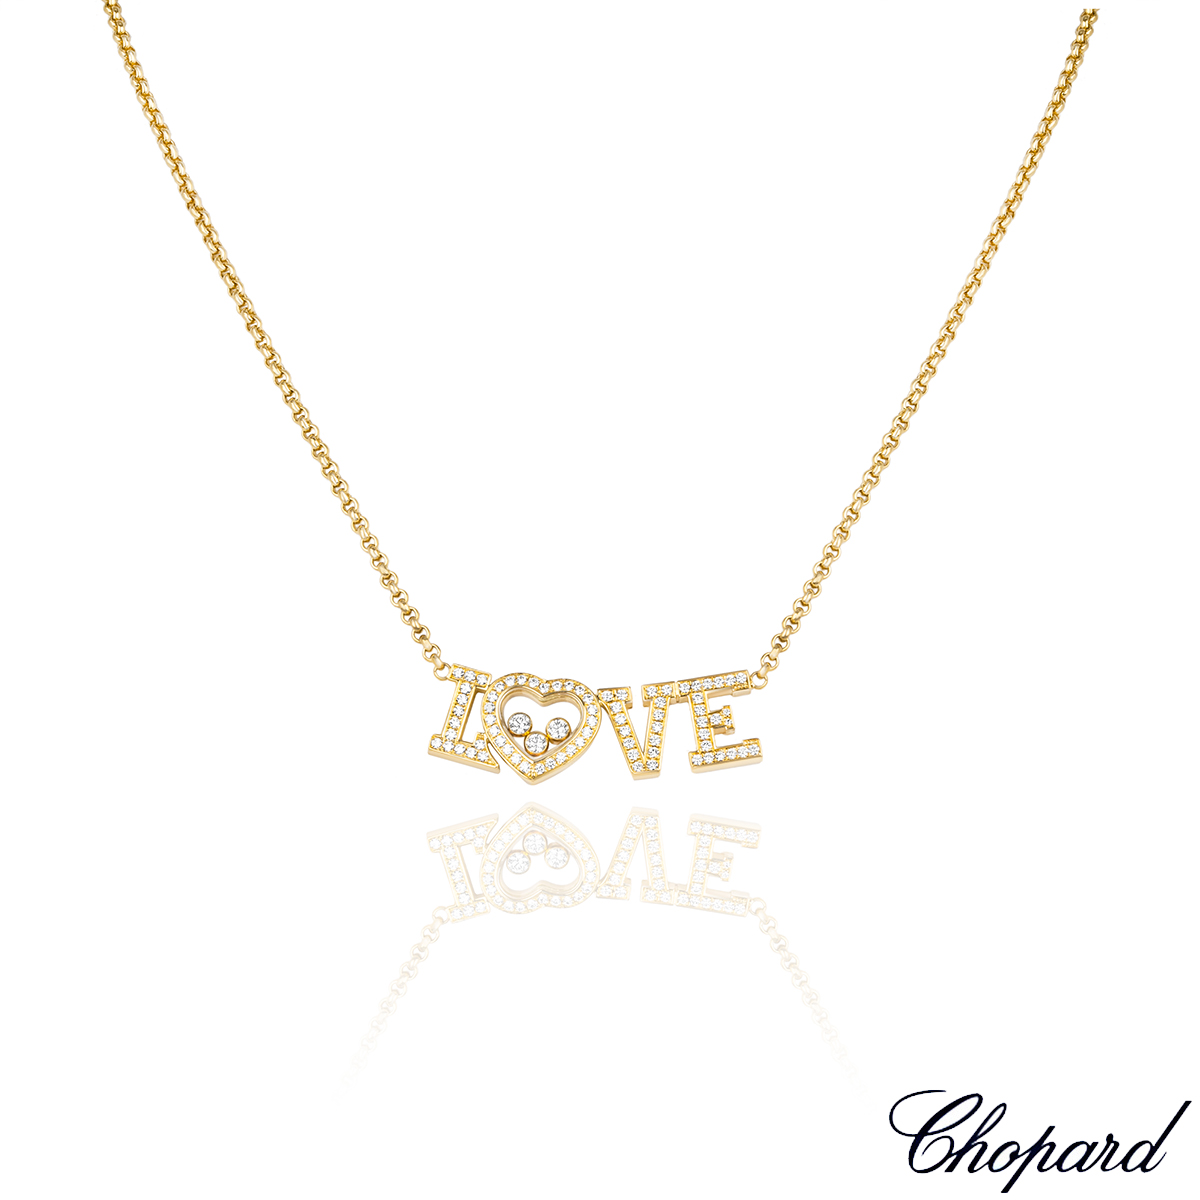 Chopard Yellow Gold Happy Diamonds Love Necklace 81/4785-020